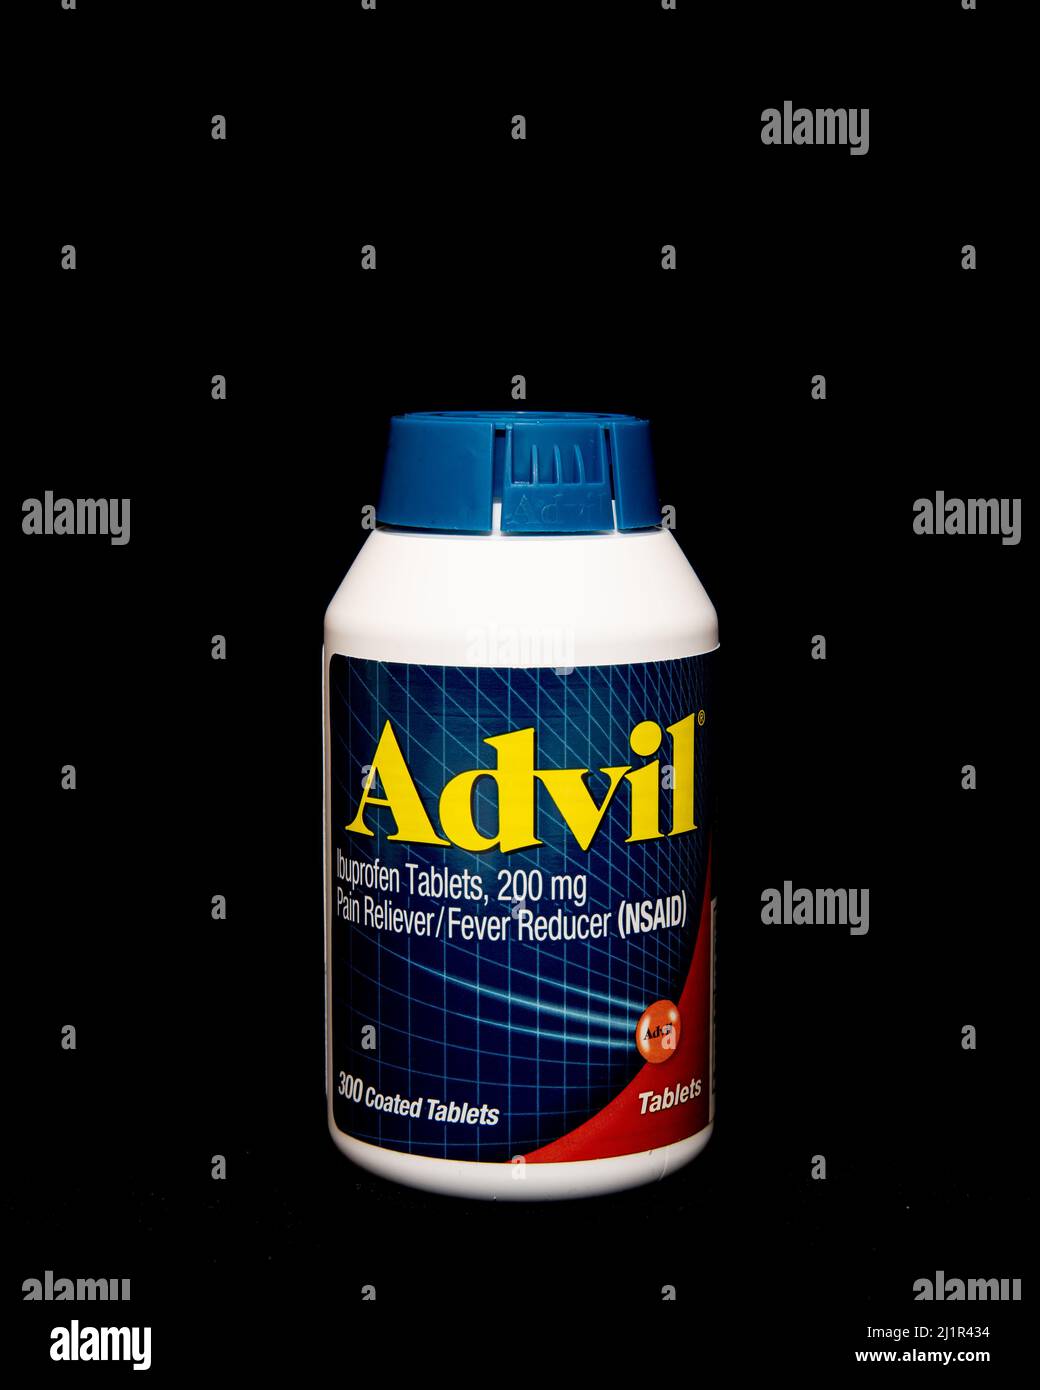 A white plastic bottle of 300 coated tablets of Advil, 200 mg Ibuprofen, a pain reliever and fever reducer NSAID isolated on black Stock Photo